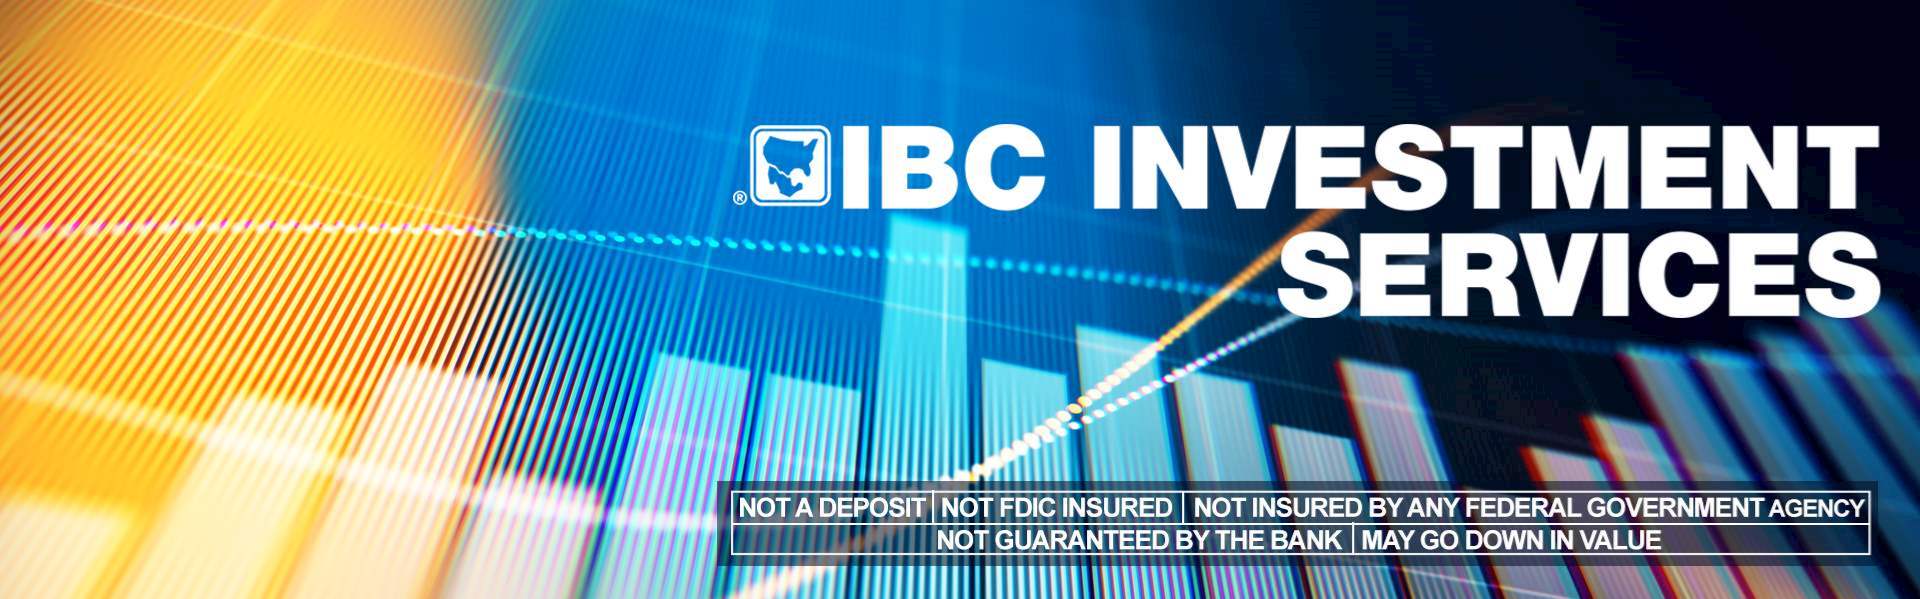 IBC Bank About Us